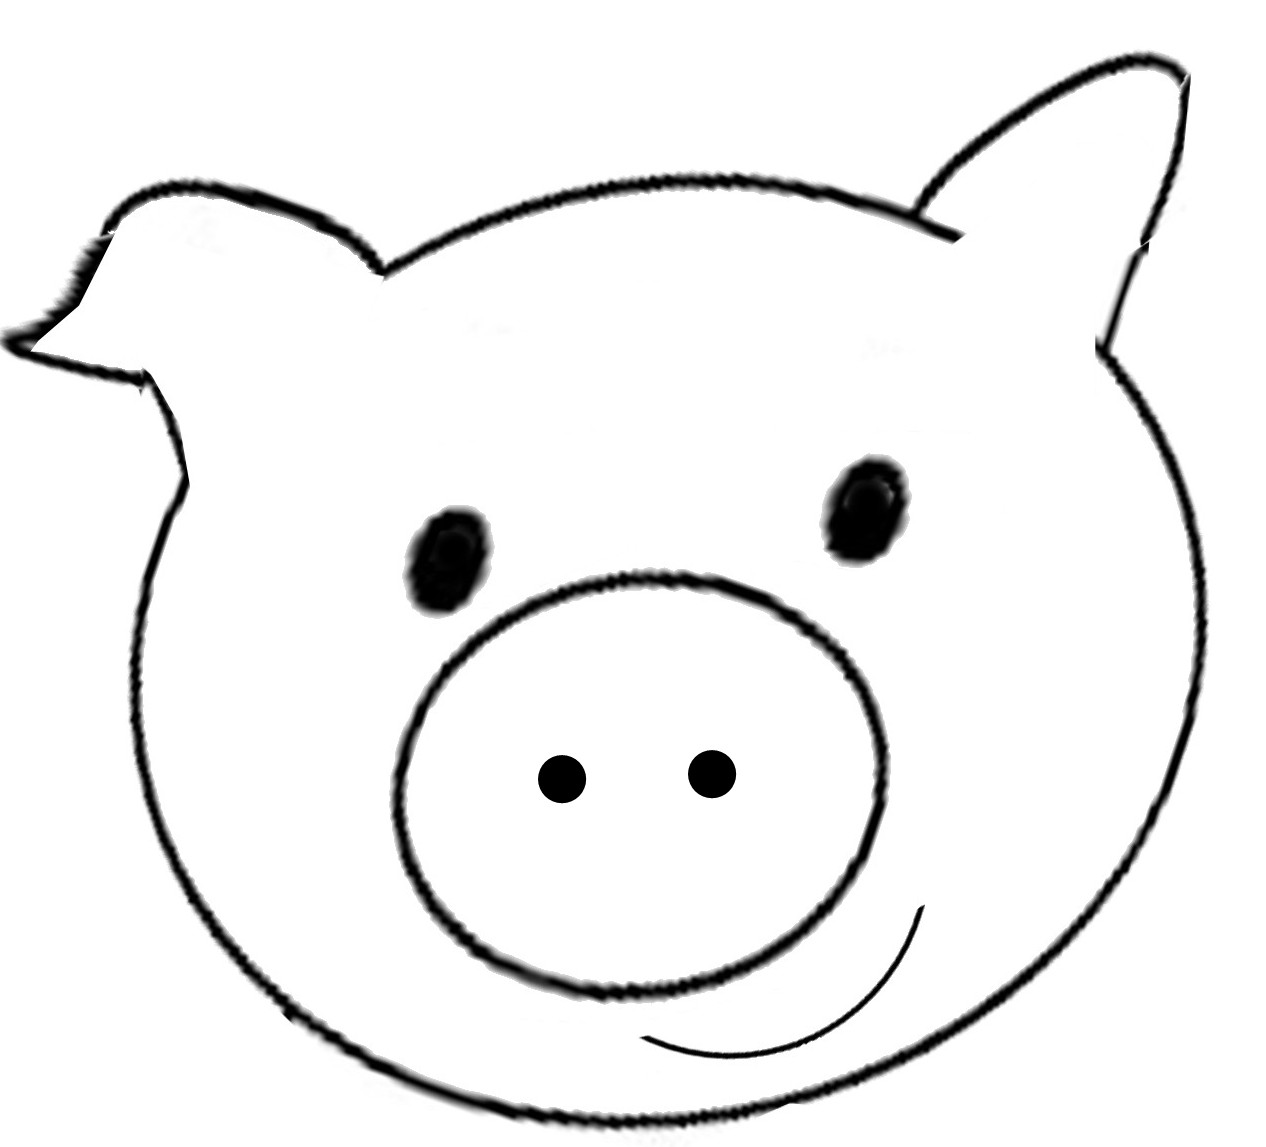 pig mask clipart - photo #18